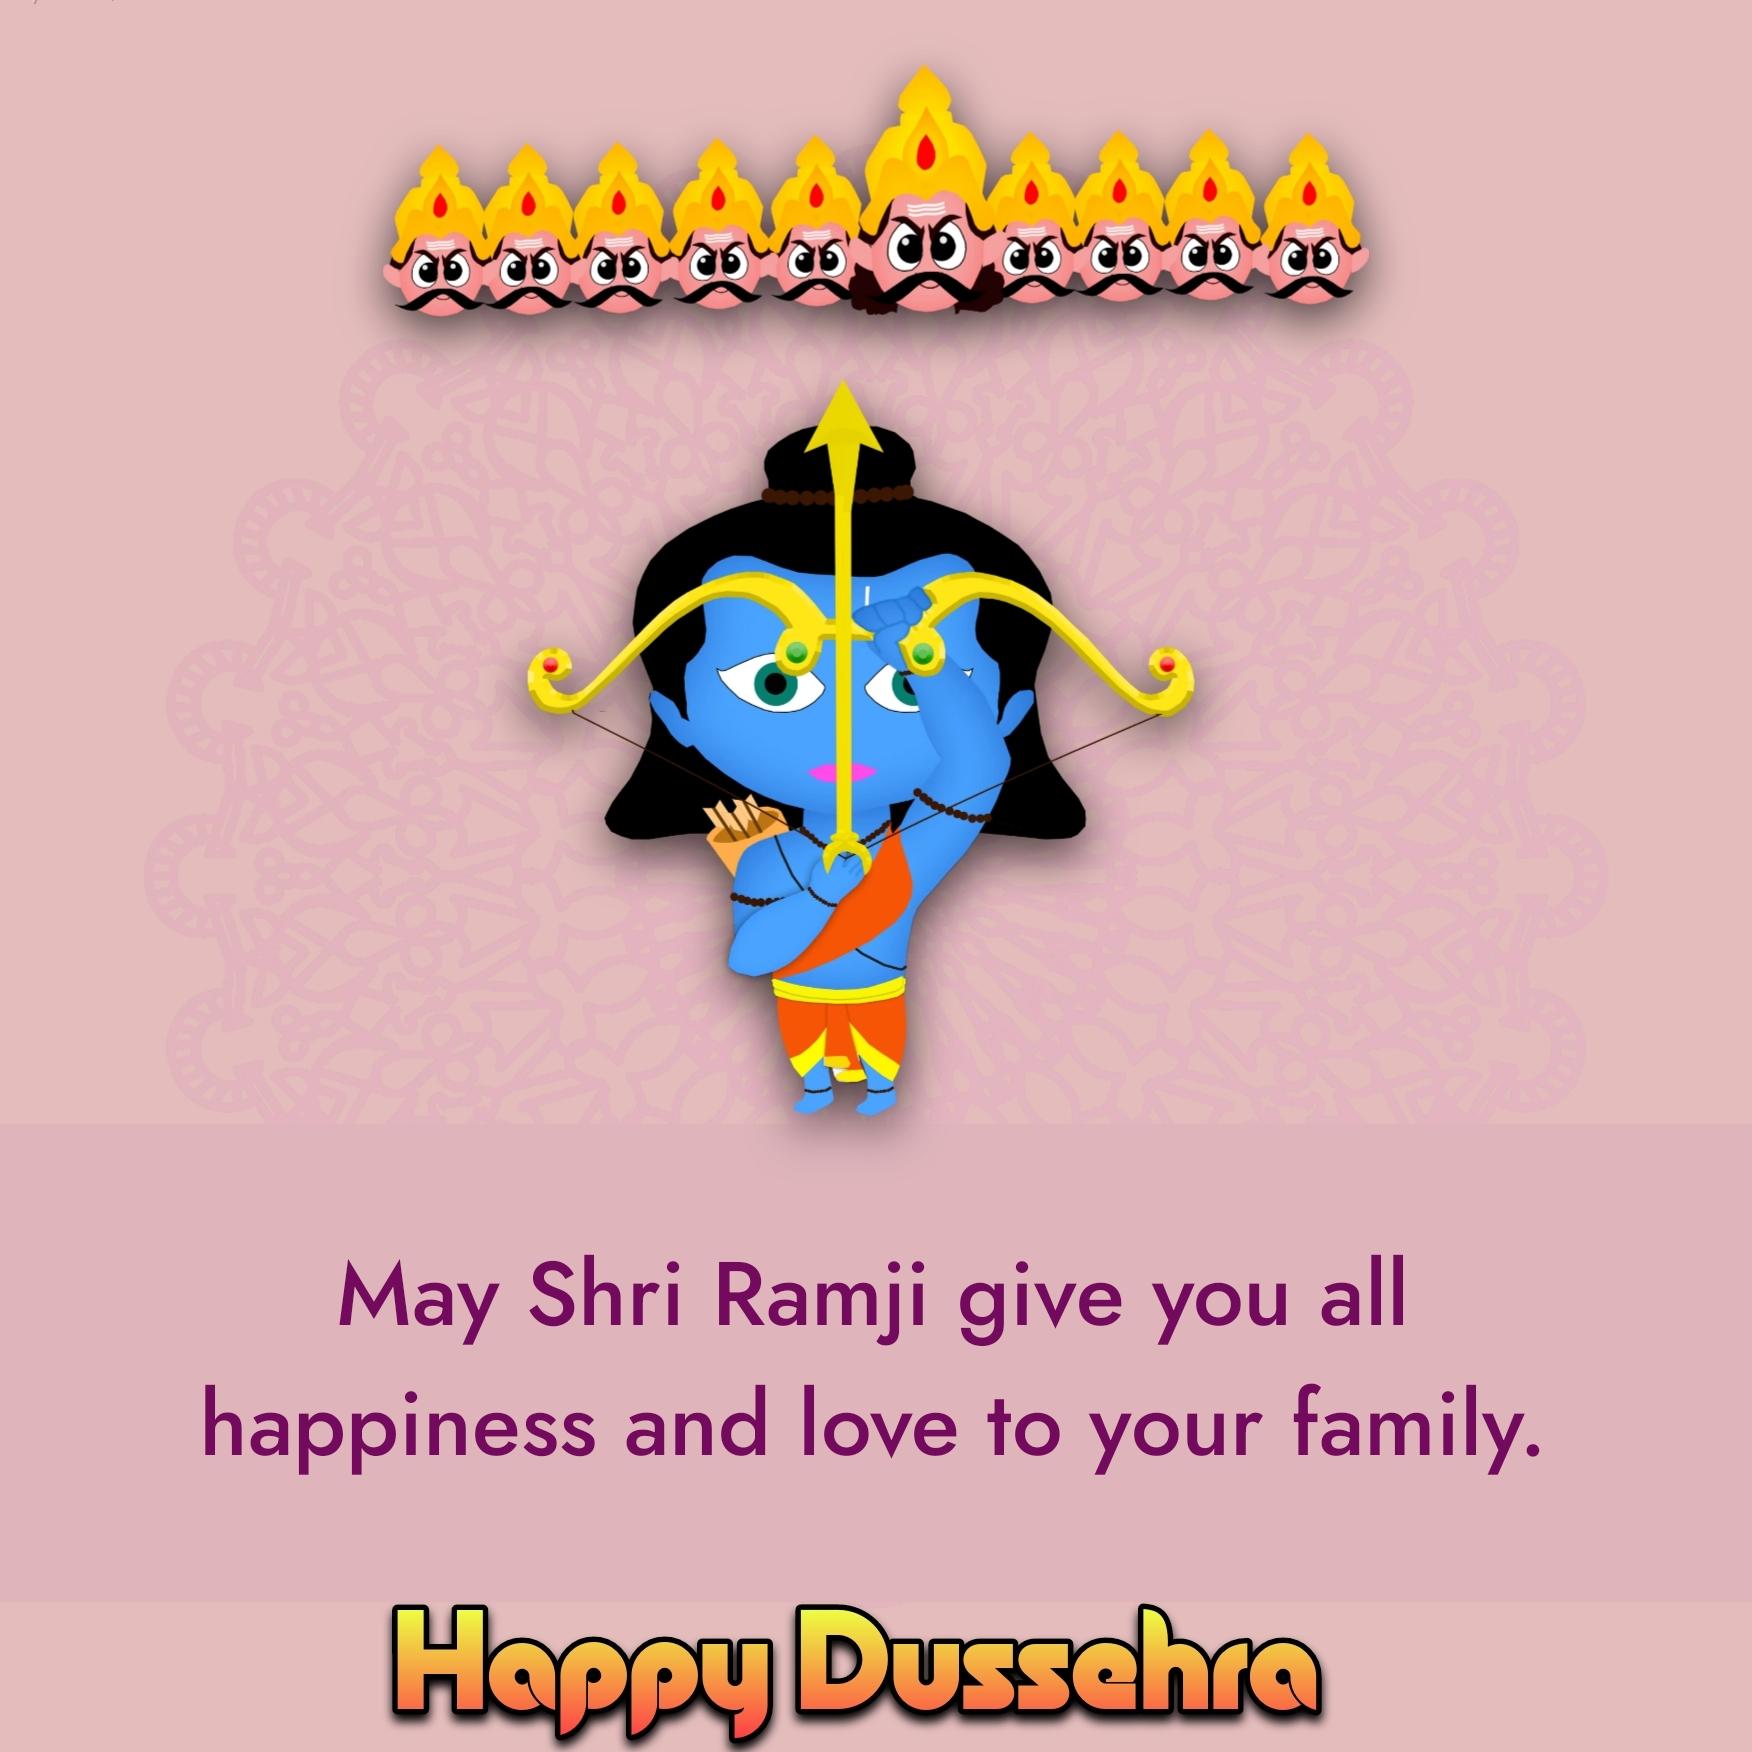 May Shri Ramji give you all happiness and love to your family